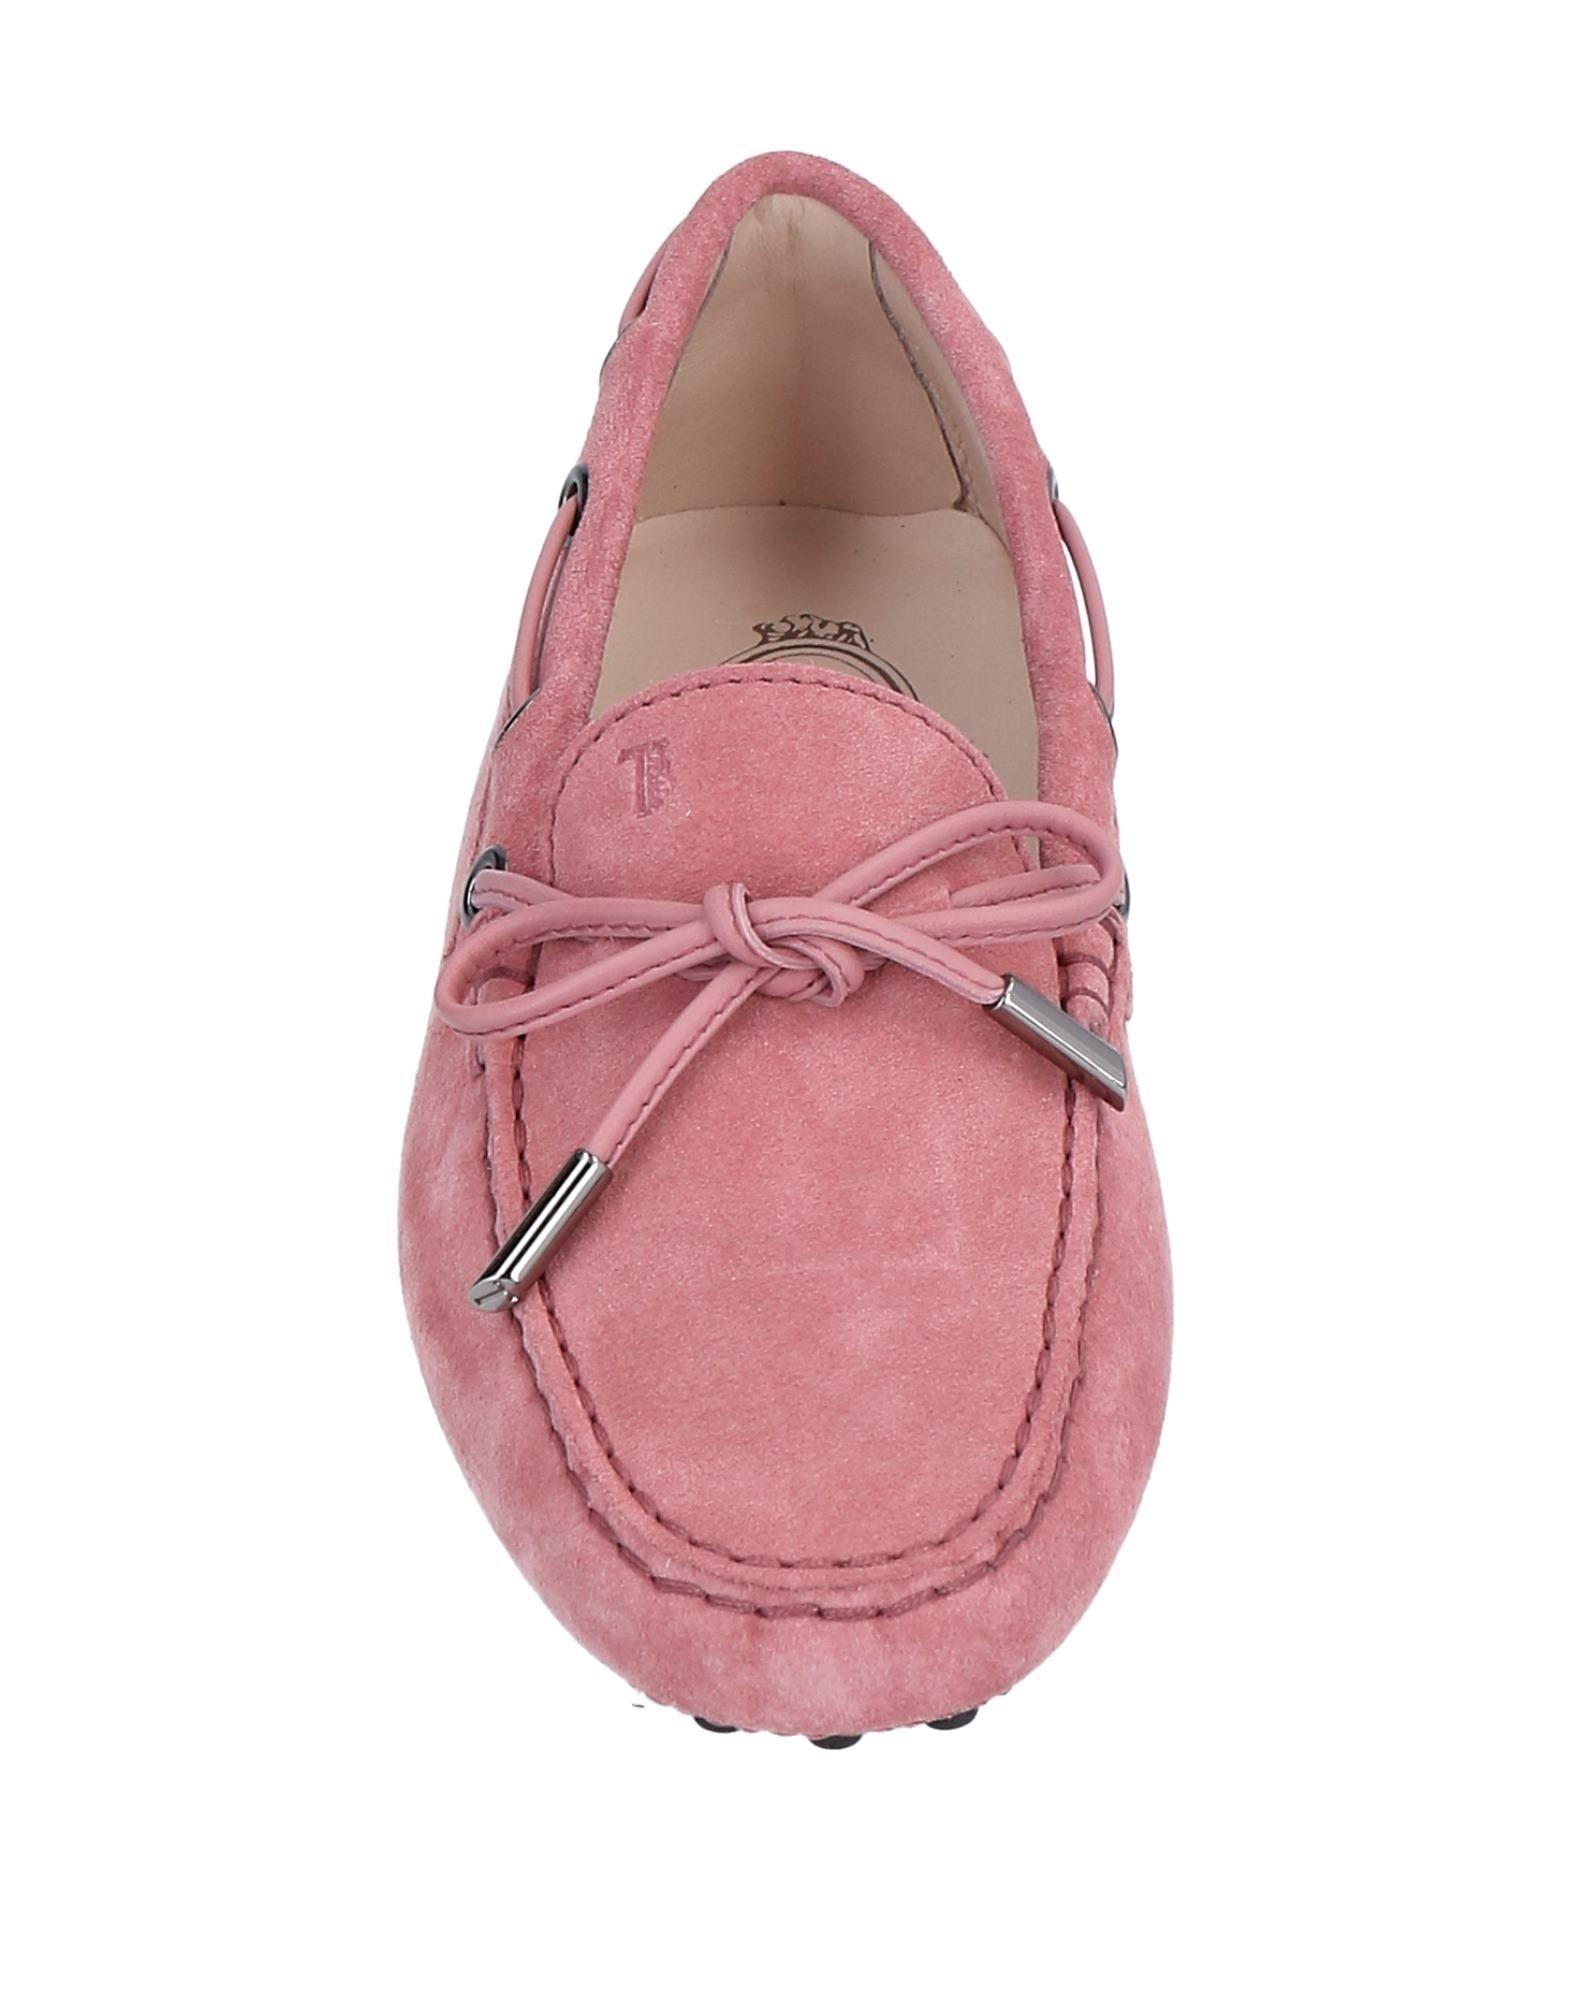 Tod's Suede Loafers in Pastel Pink (Pink) - Lyst